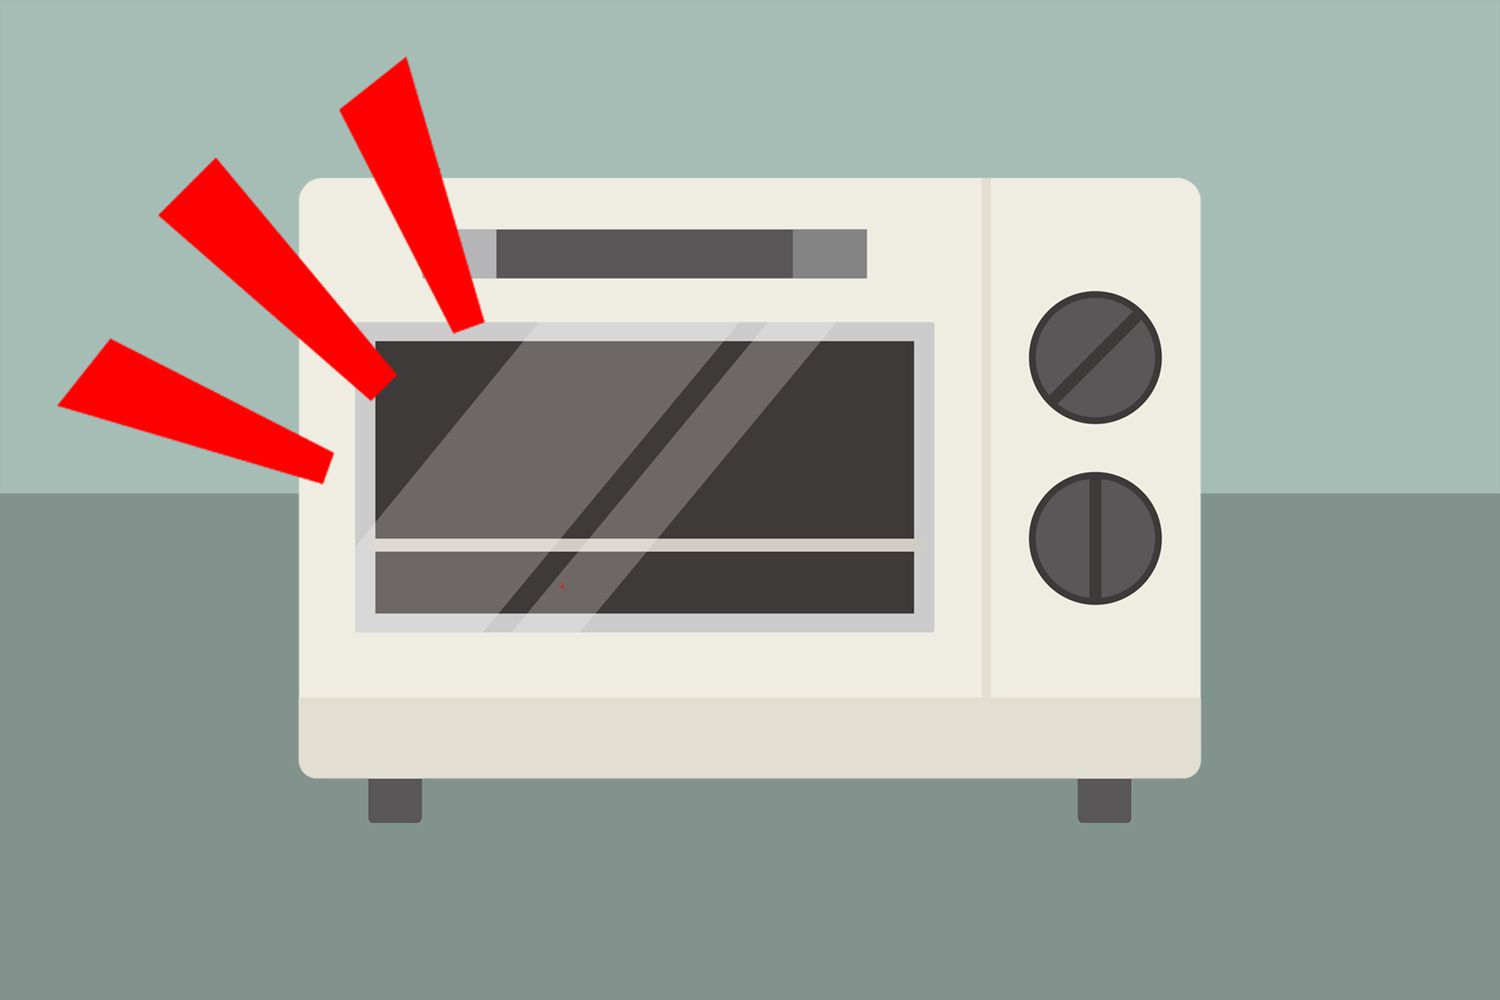 an illustration of a toaster oven with red lines beside it